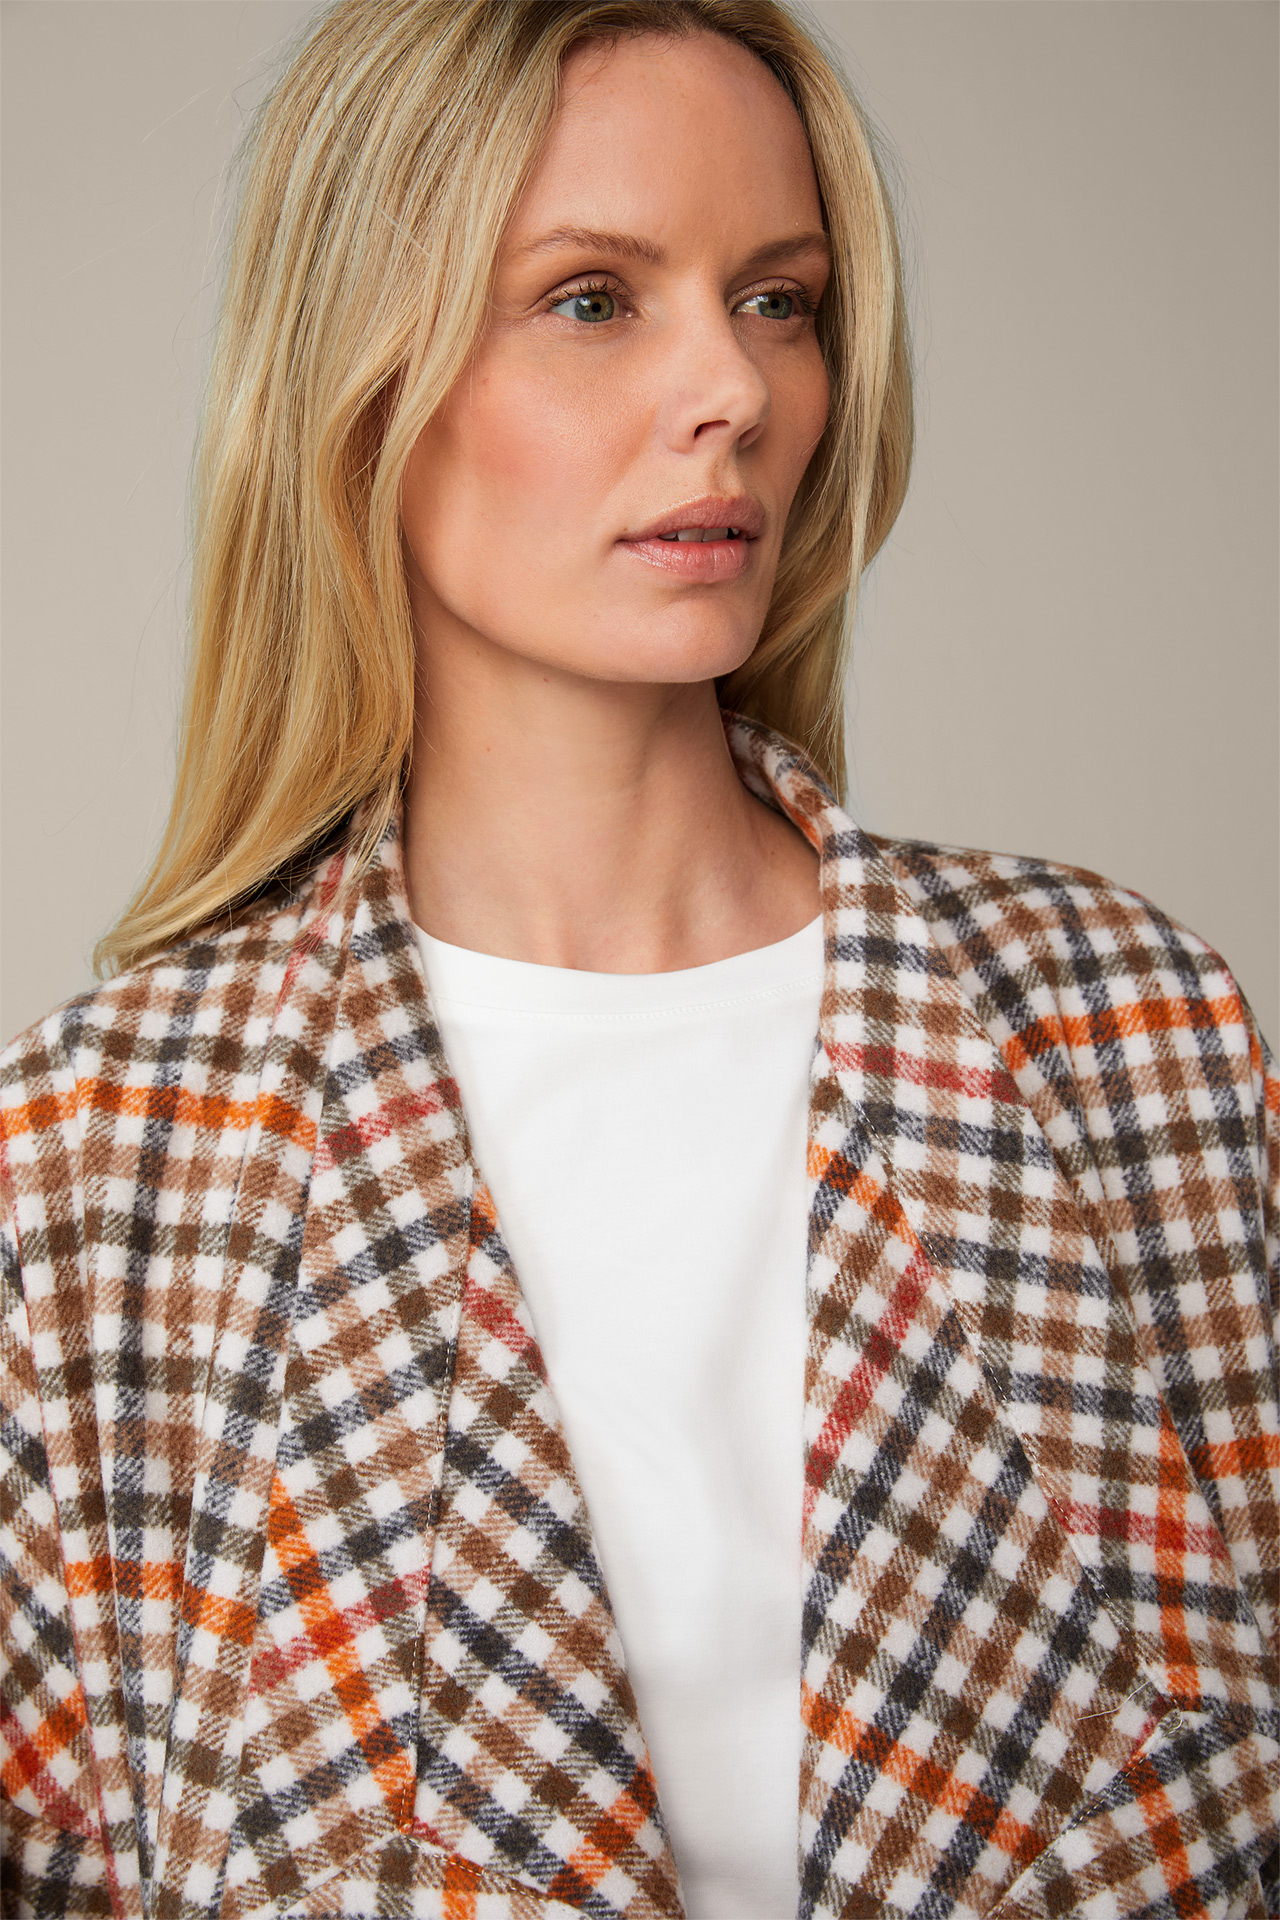 Wool Mix City Coat with Shawl Collar in an Ecru, Caramel and Anthracite Check